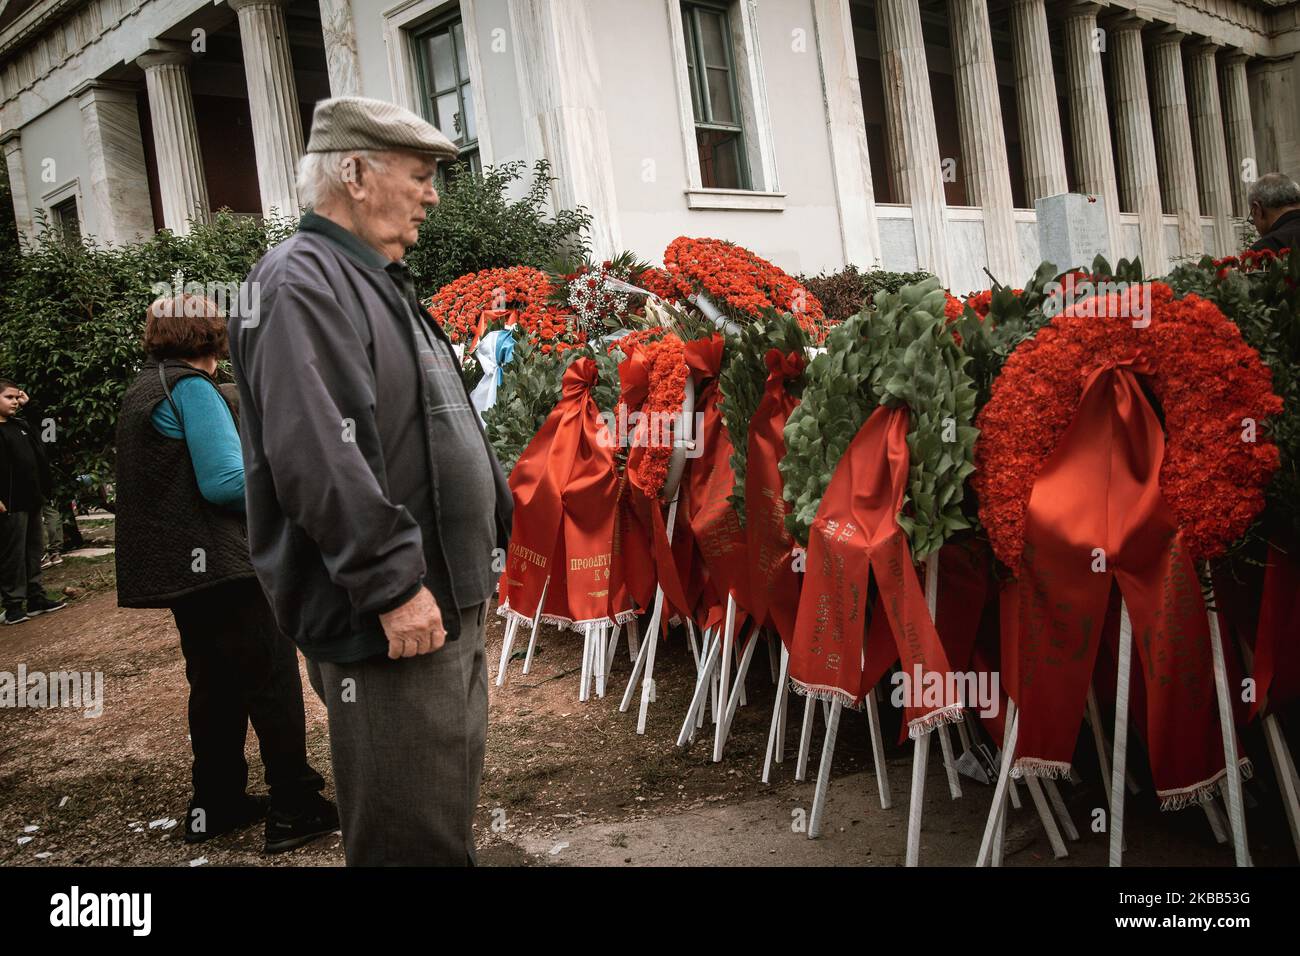 The Athens Polytechnic School celebrates the 46th anniversary from the student uprising in 1973 against the military junta on 16 November 2019 in Athens, Greece. Every year thousands of Greeks visit the polytechnic to pay tribute to the people that fought against the fascist regime. (Photo by Maria Chourdari/NurPhoto) Stock Photo